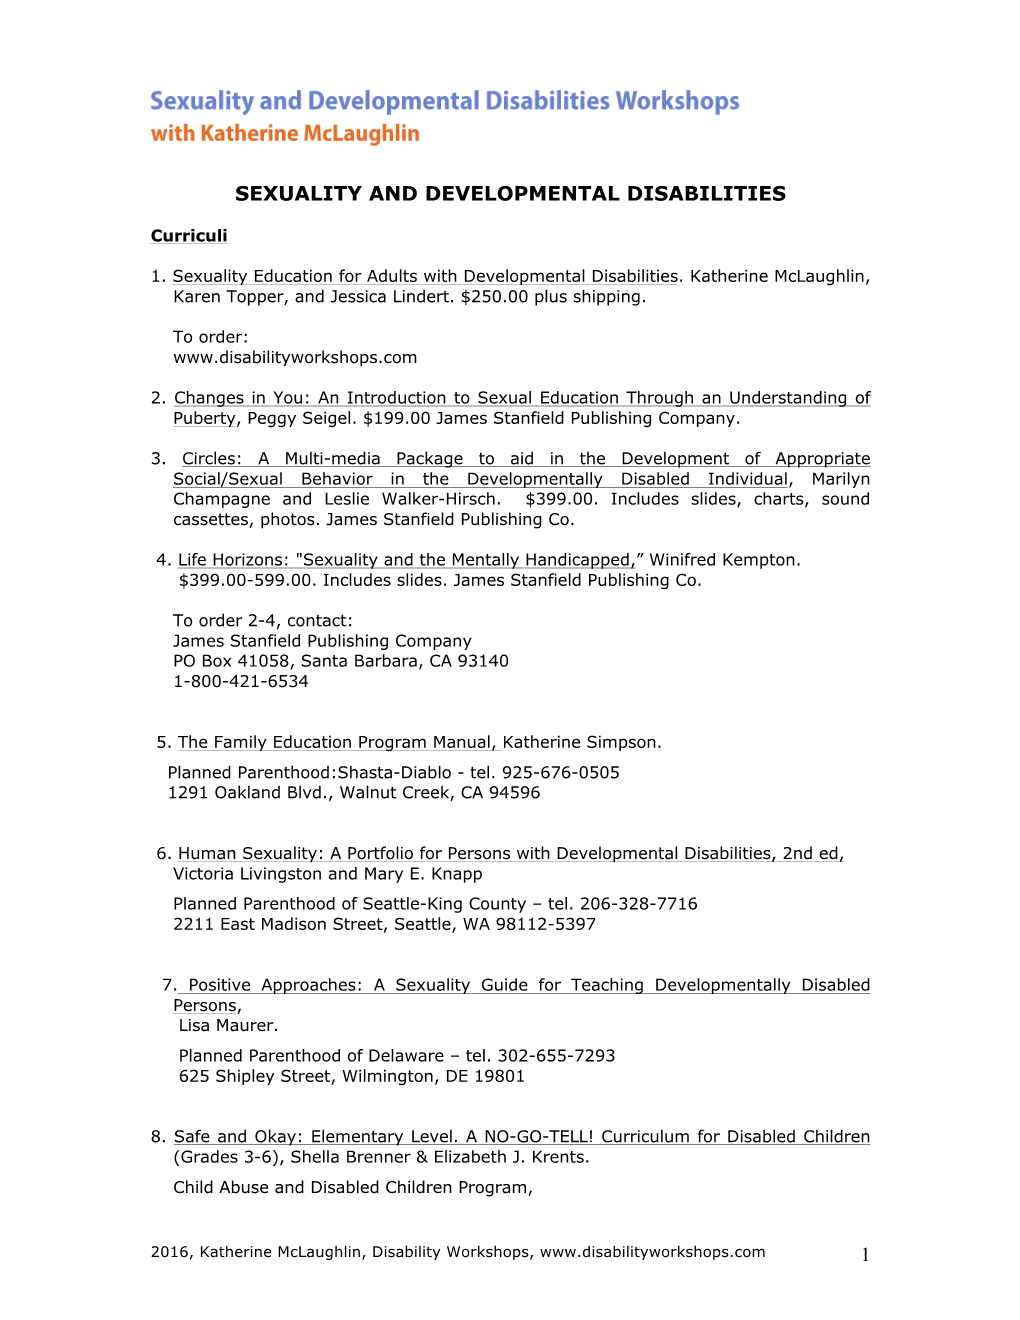 1 Sexuality and Developmental Disabilities